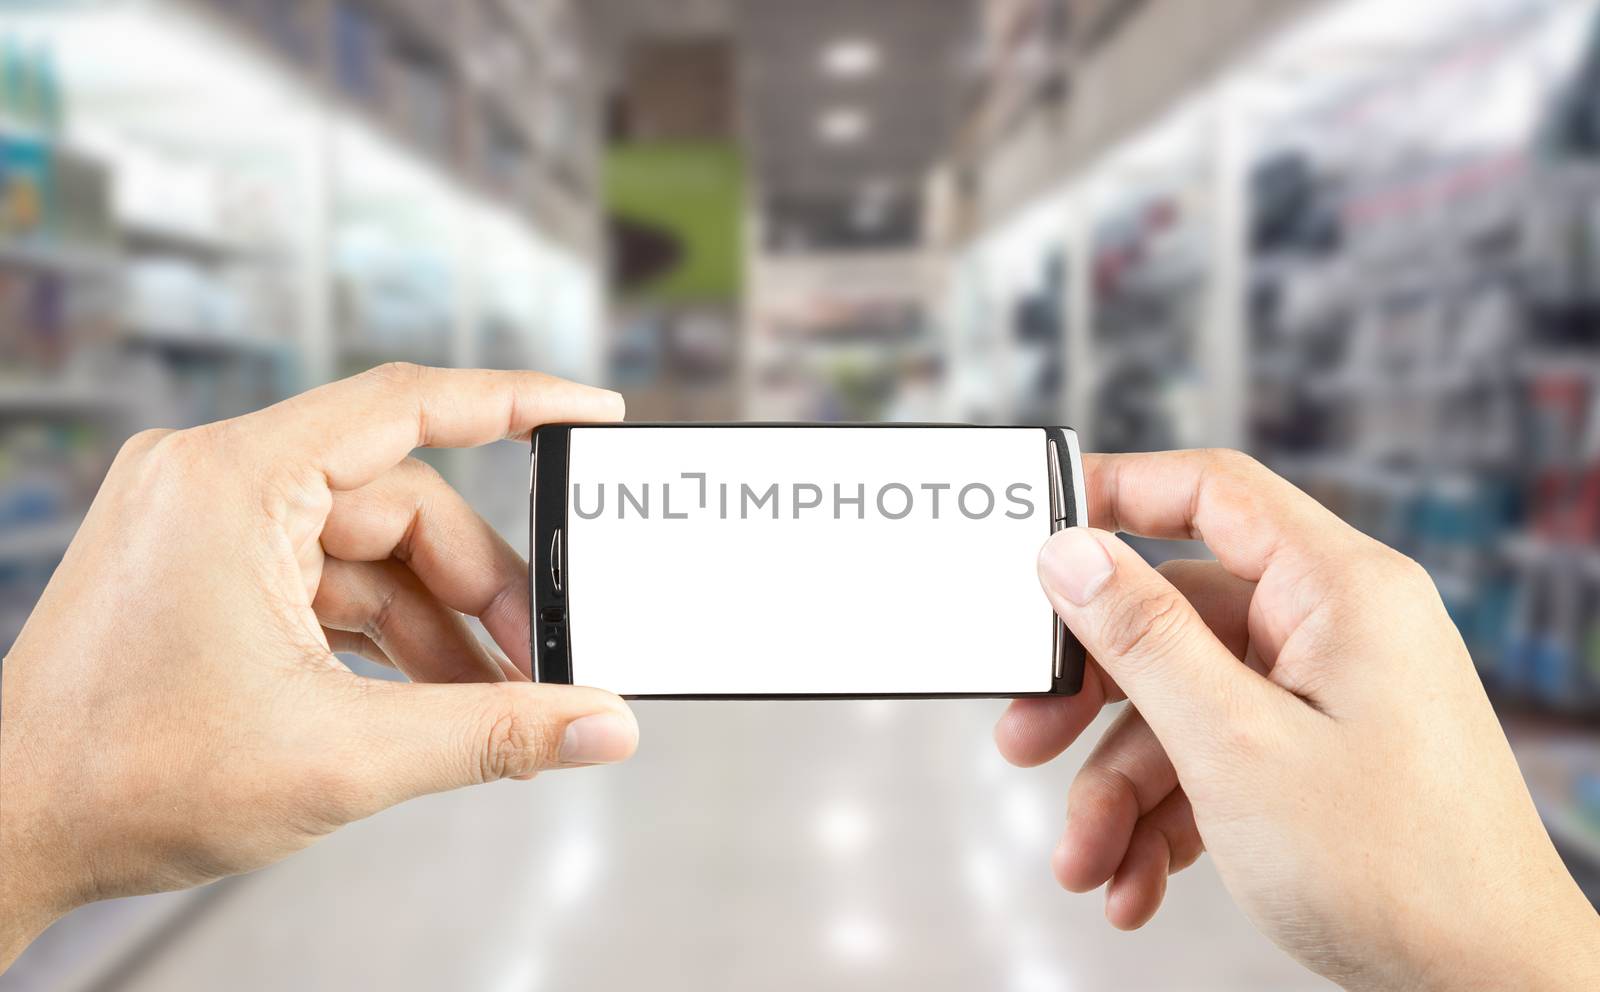 Hand holding smart phone with blur background of shopping mall market, business financial or shopping concept